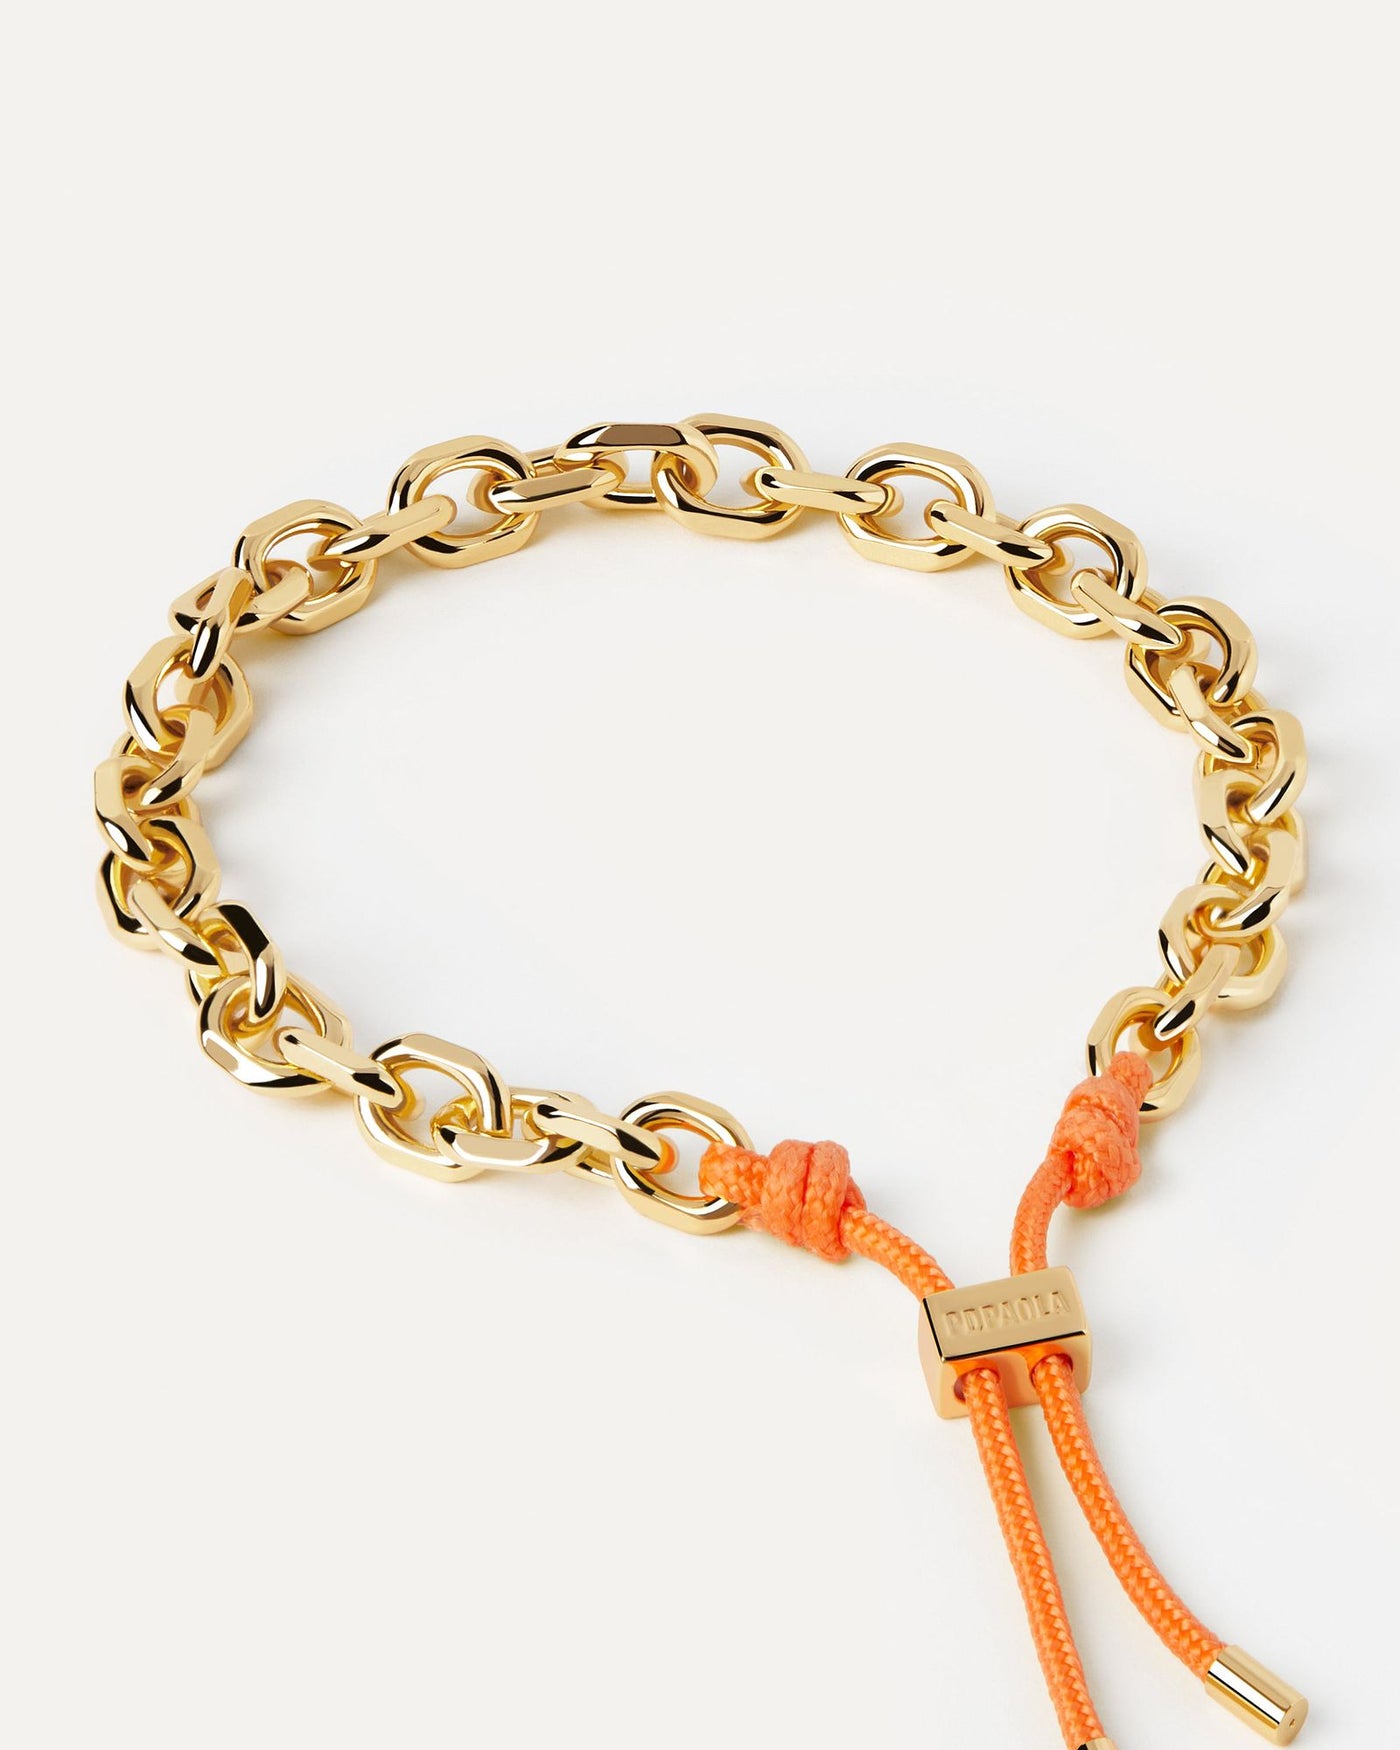 2024 Selection | Tangerine Essential Rope and Chain Bracelet. Silver chain bracelet with interwined orange rope and adjustable sliding clasp. Get the latest arrival from PDPAOLA. Place your order safely and get this Best Seller. Free Shipping.